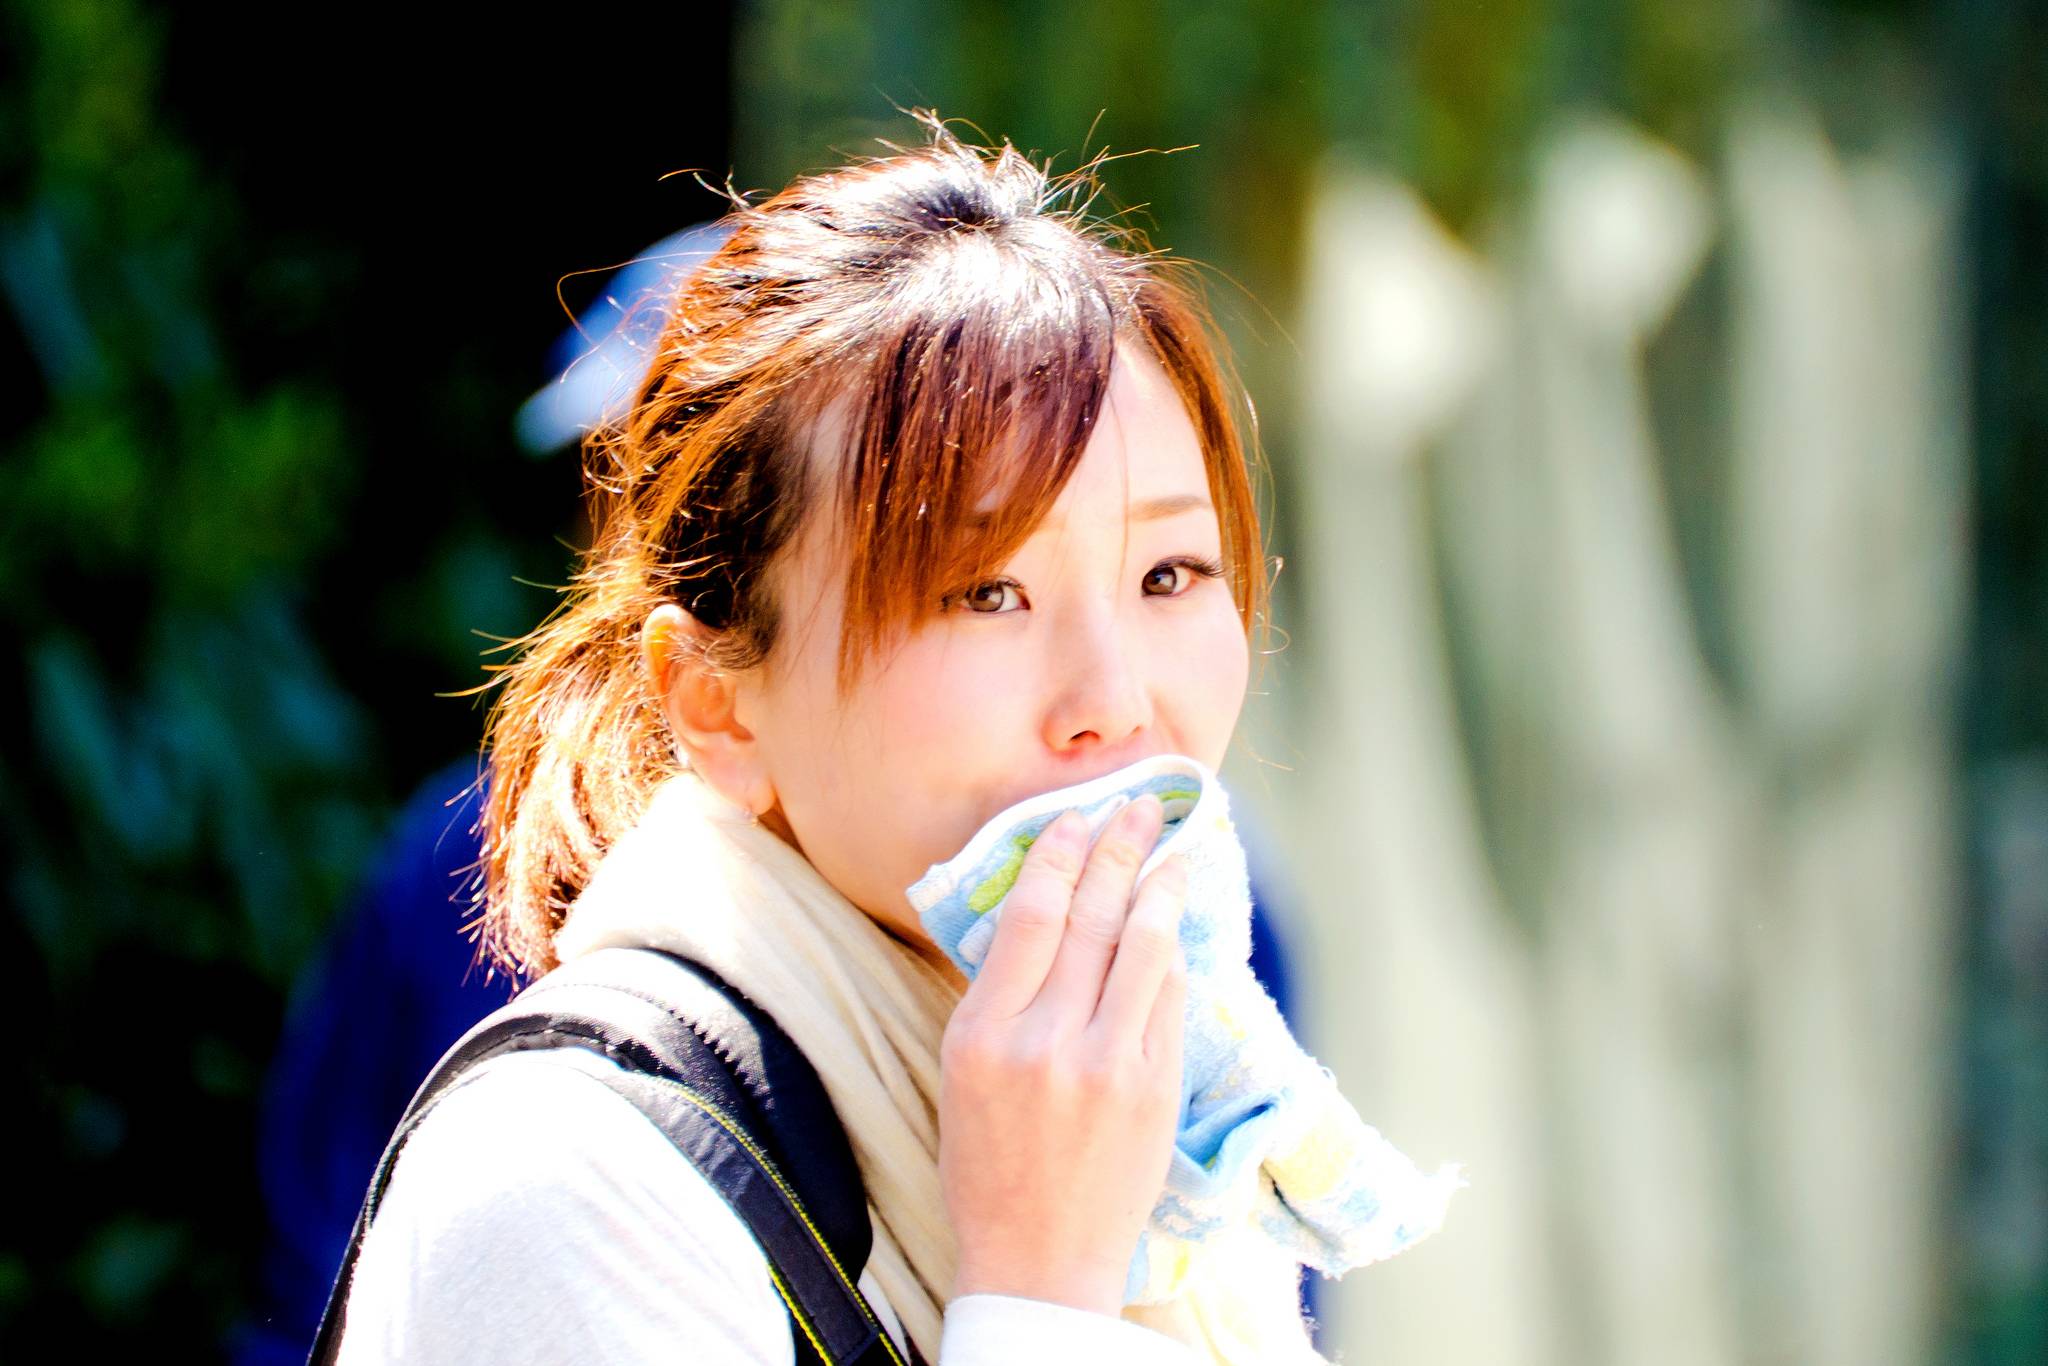 Work culture leaves Japanese women too tired to date